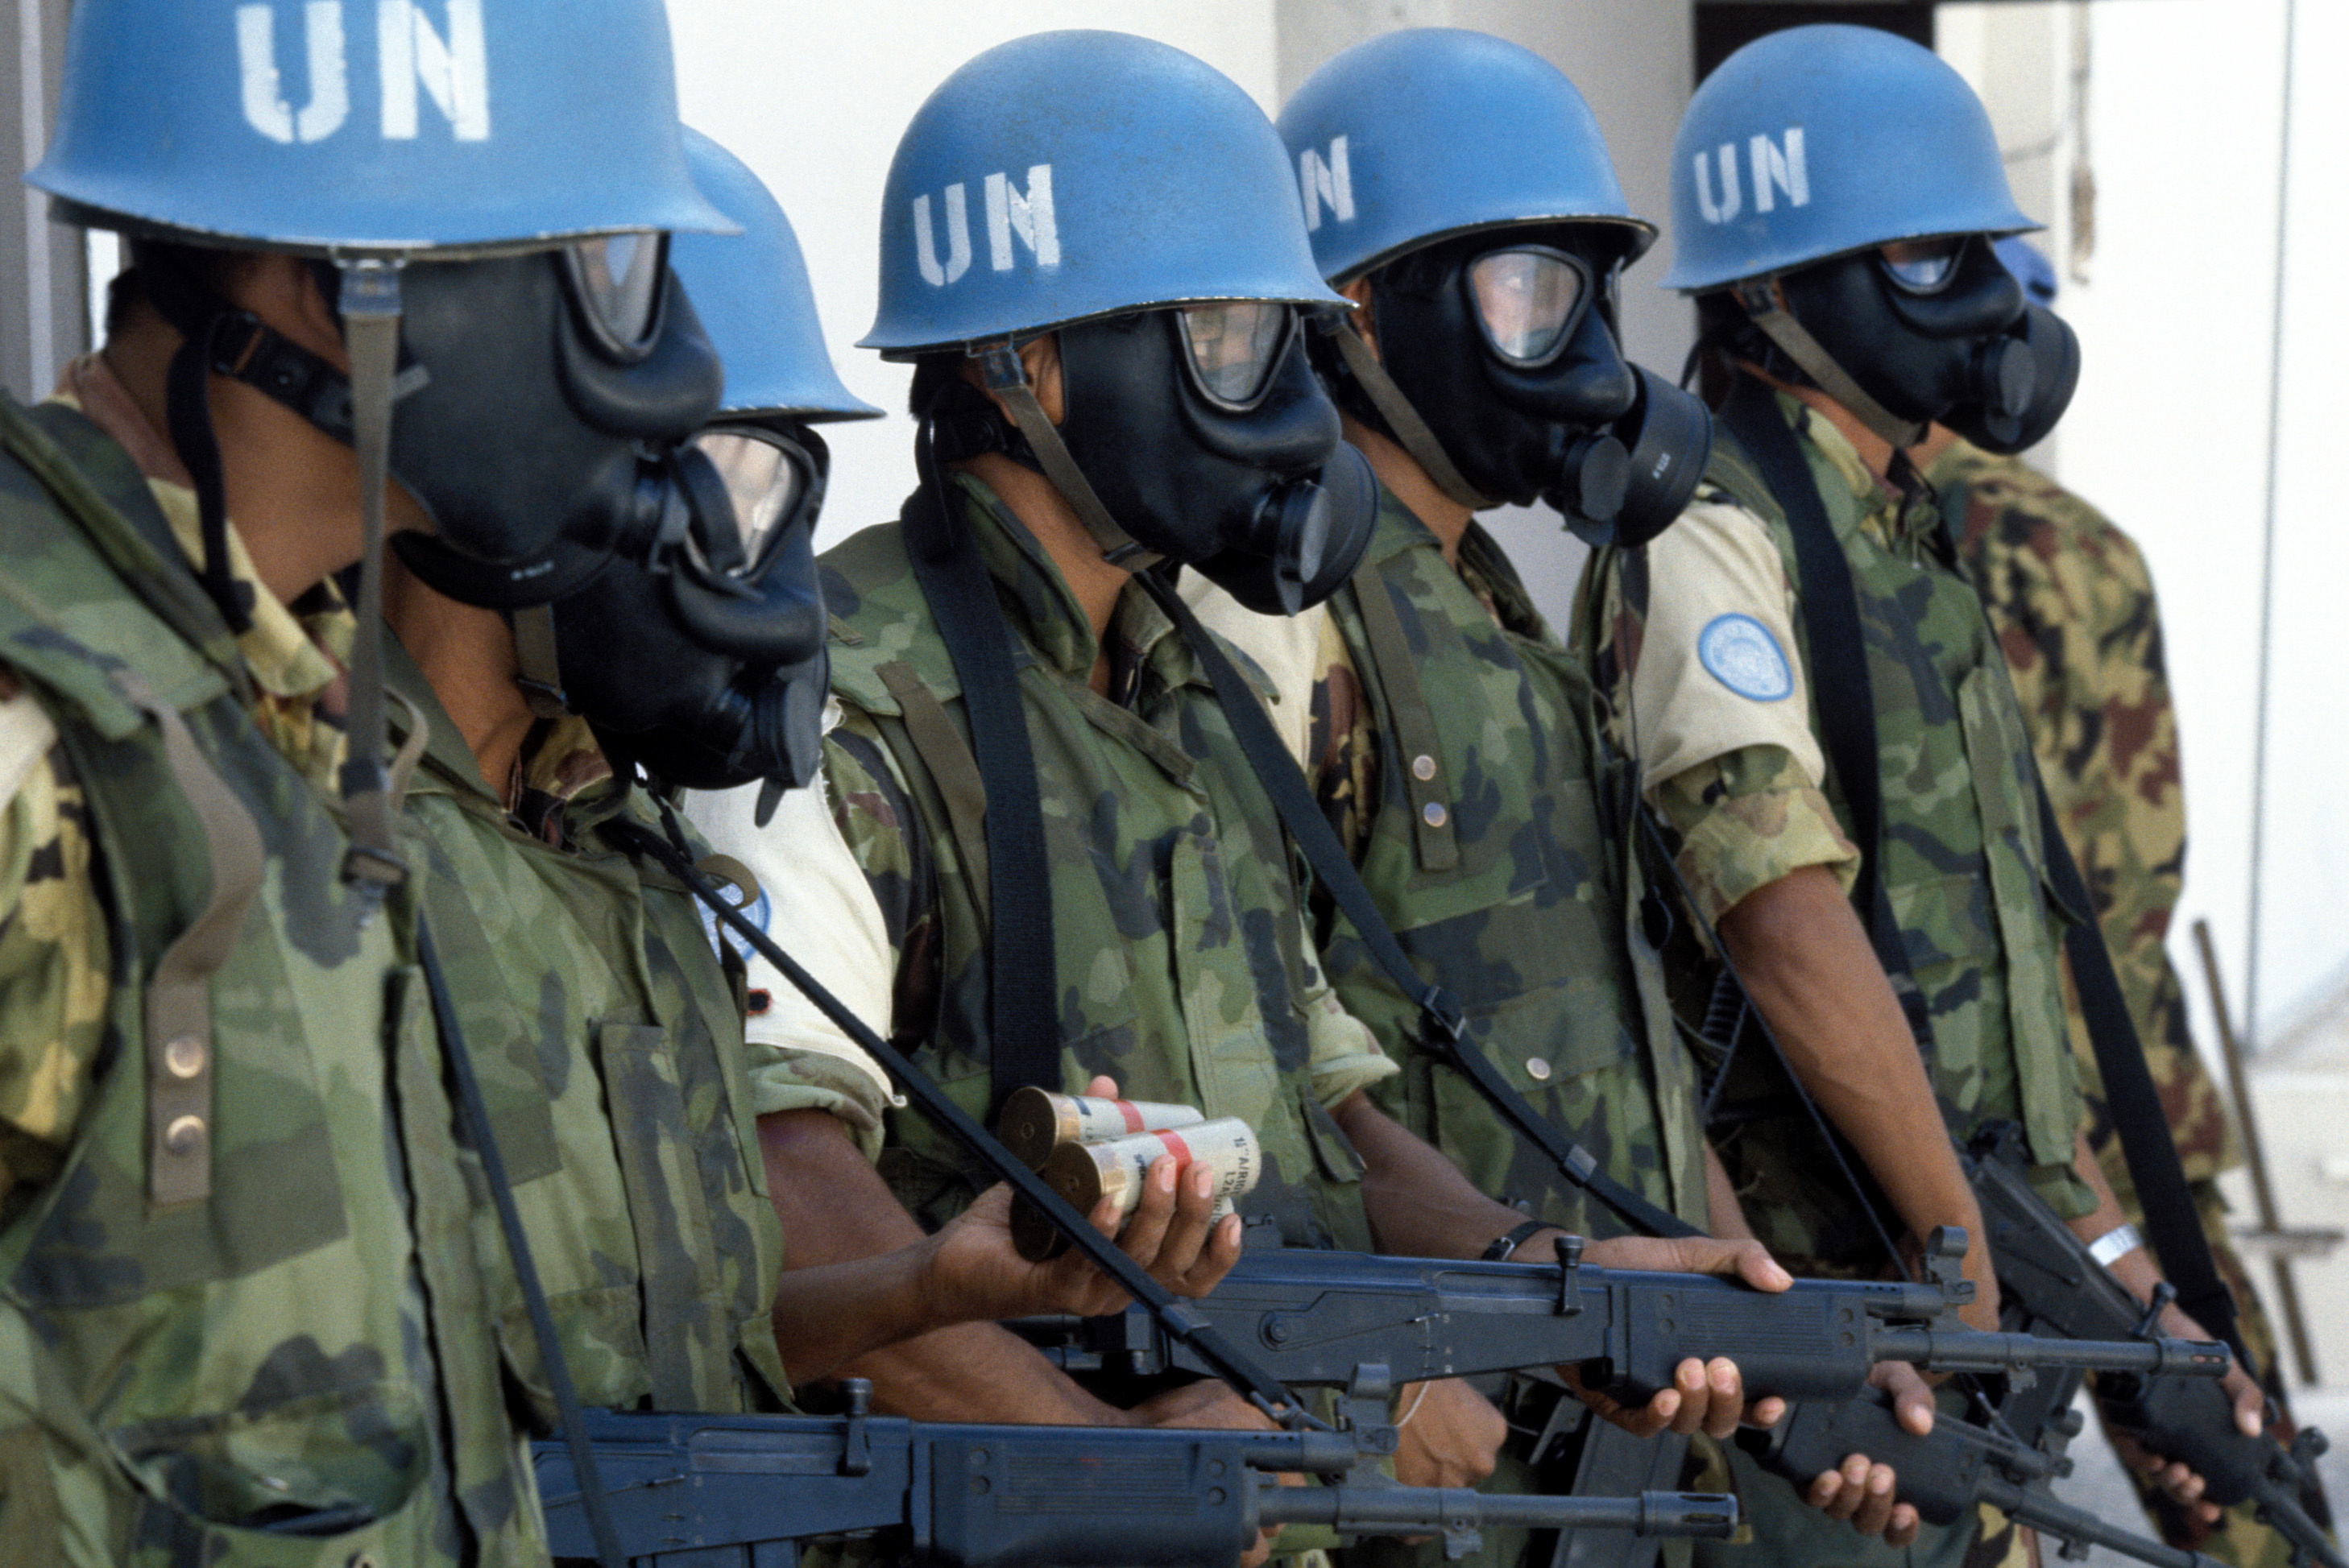 United Nations Peacekeeping Officials; accessed via Wikimedia Commons